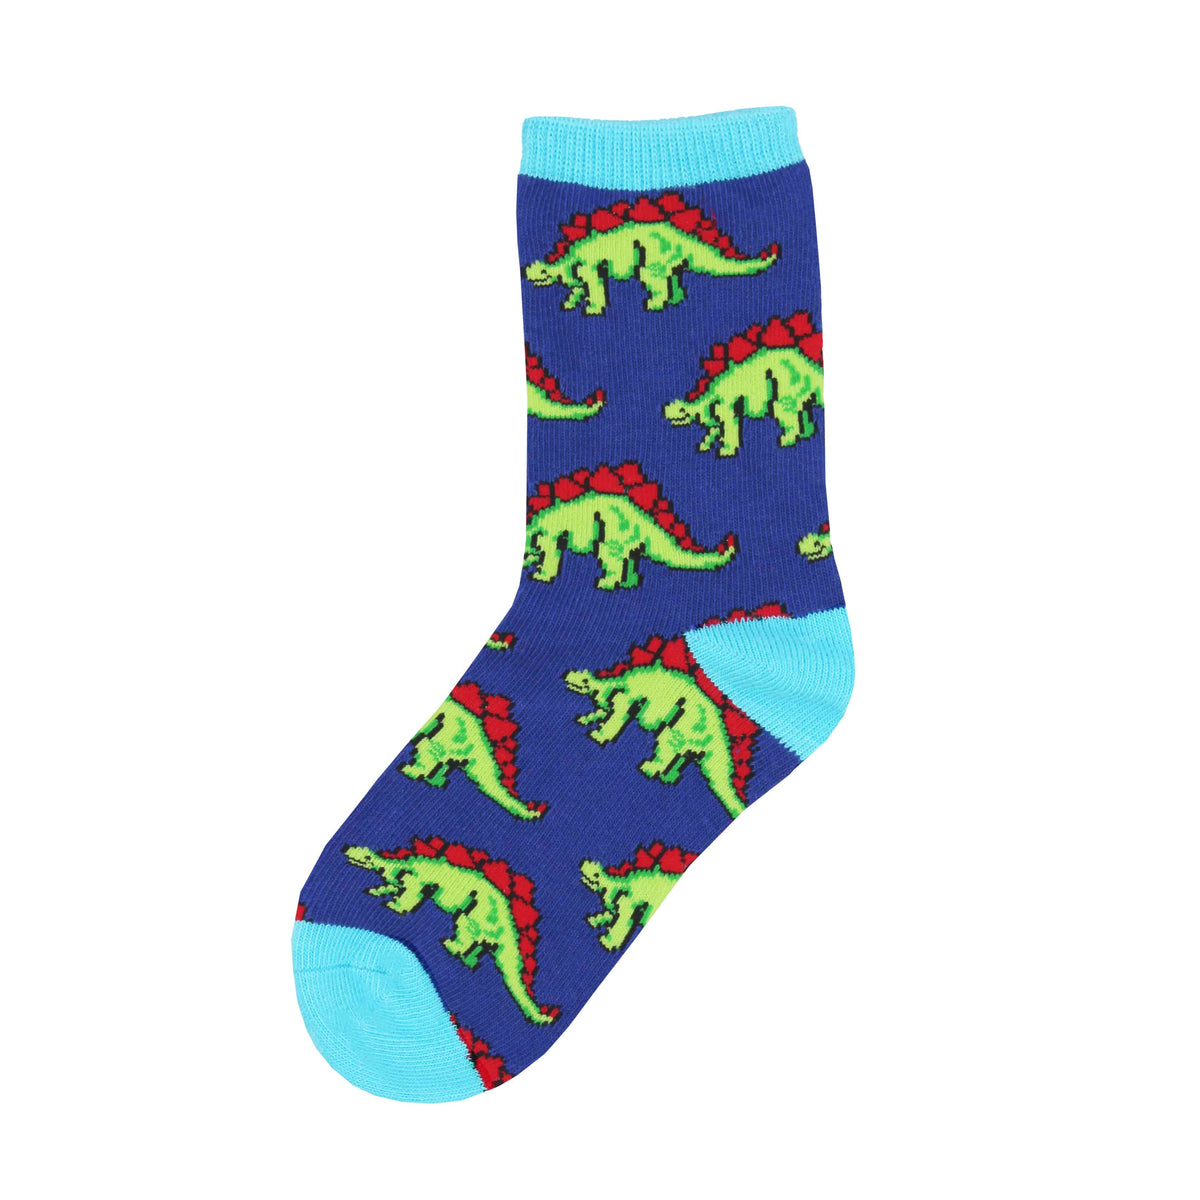 Green and red stegosaurus march across these blue kids&#39; dinosaur socks.